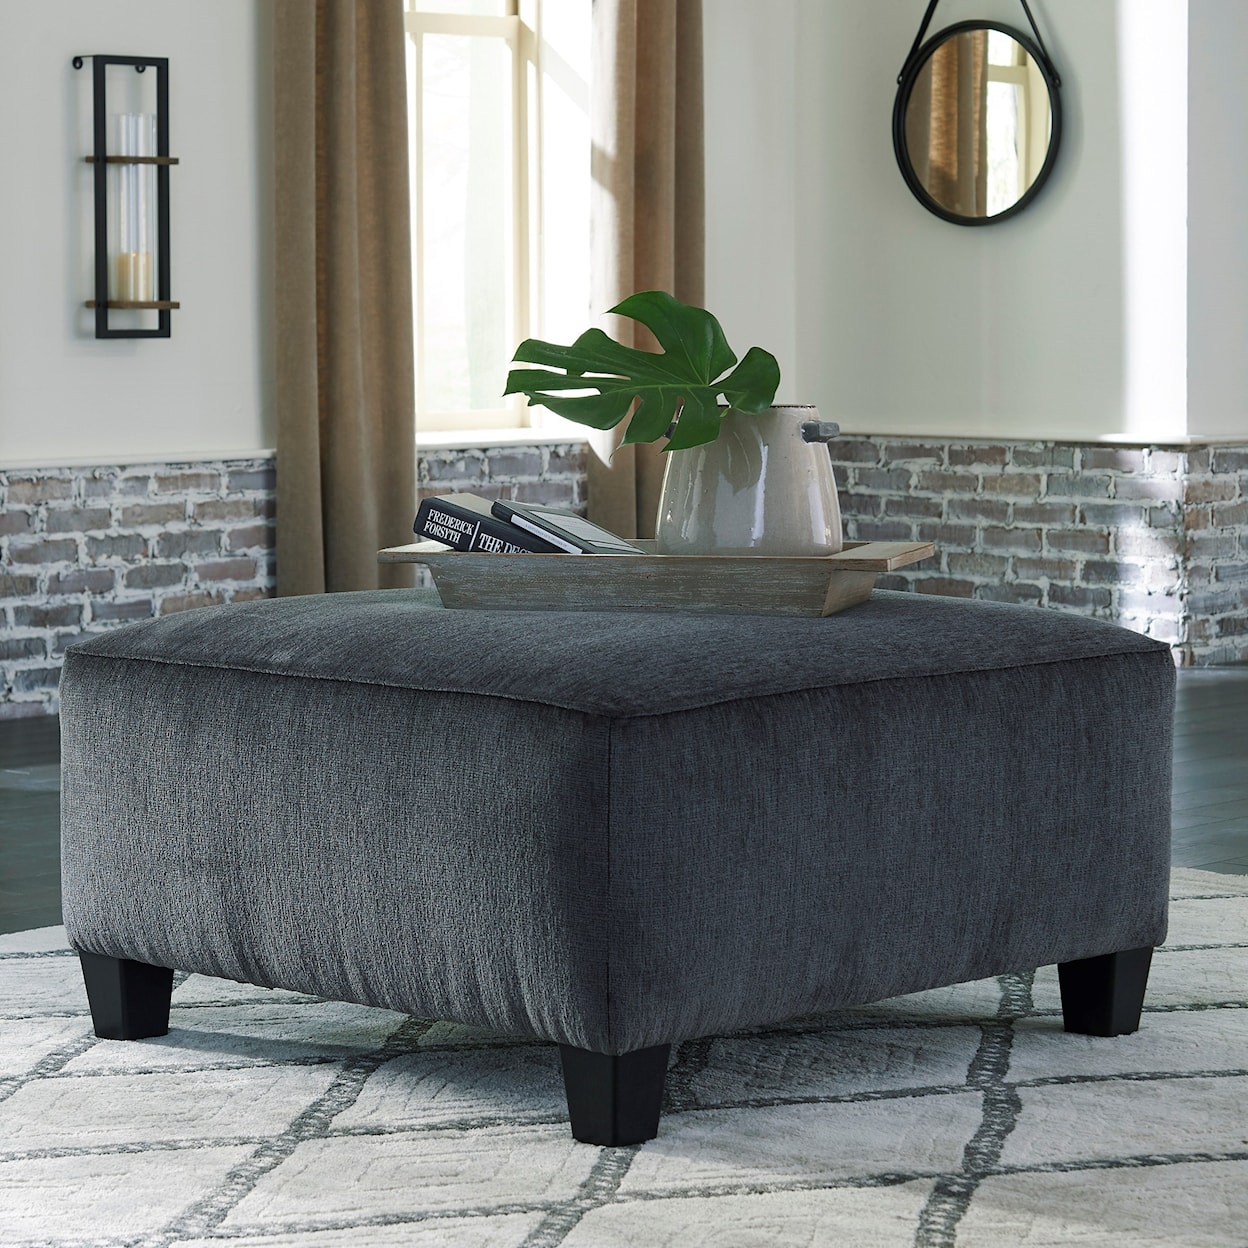 Benchcraft Abinger Oversized Accent Ottoman